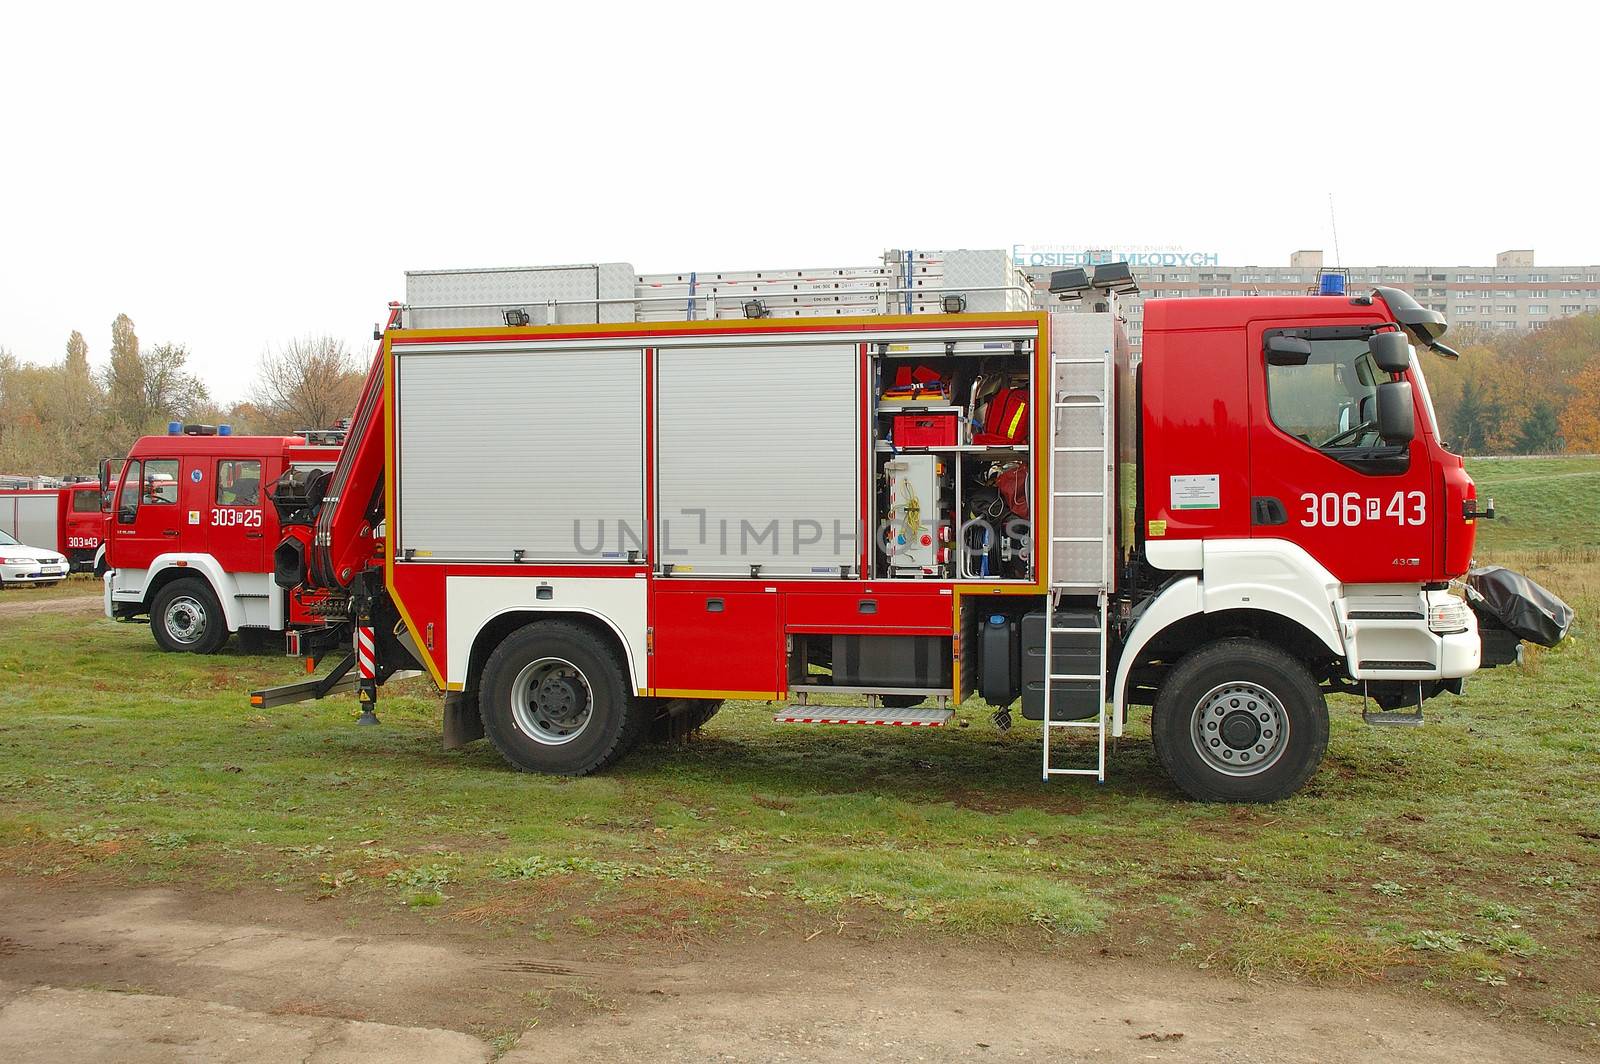 Fire brigade trucks during exercises on river bank by janhetman